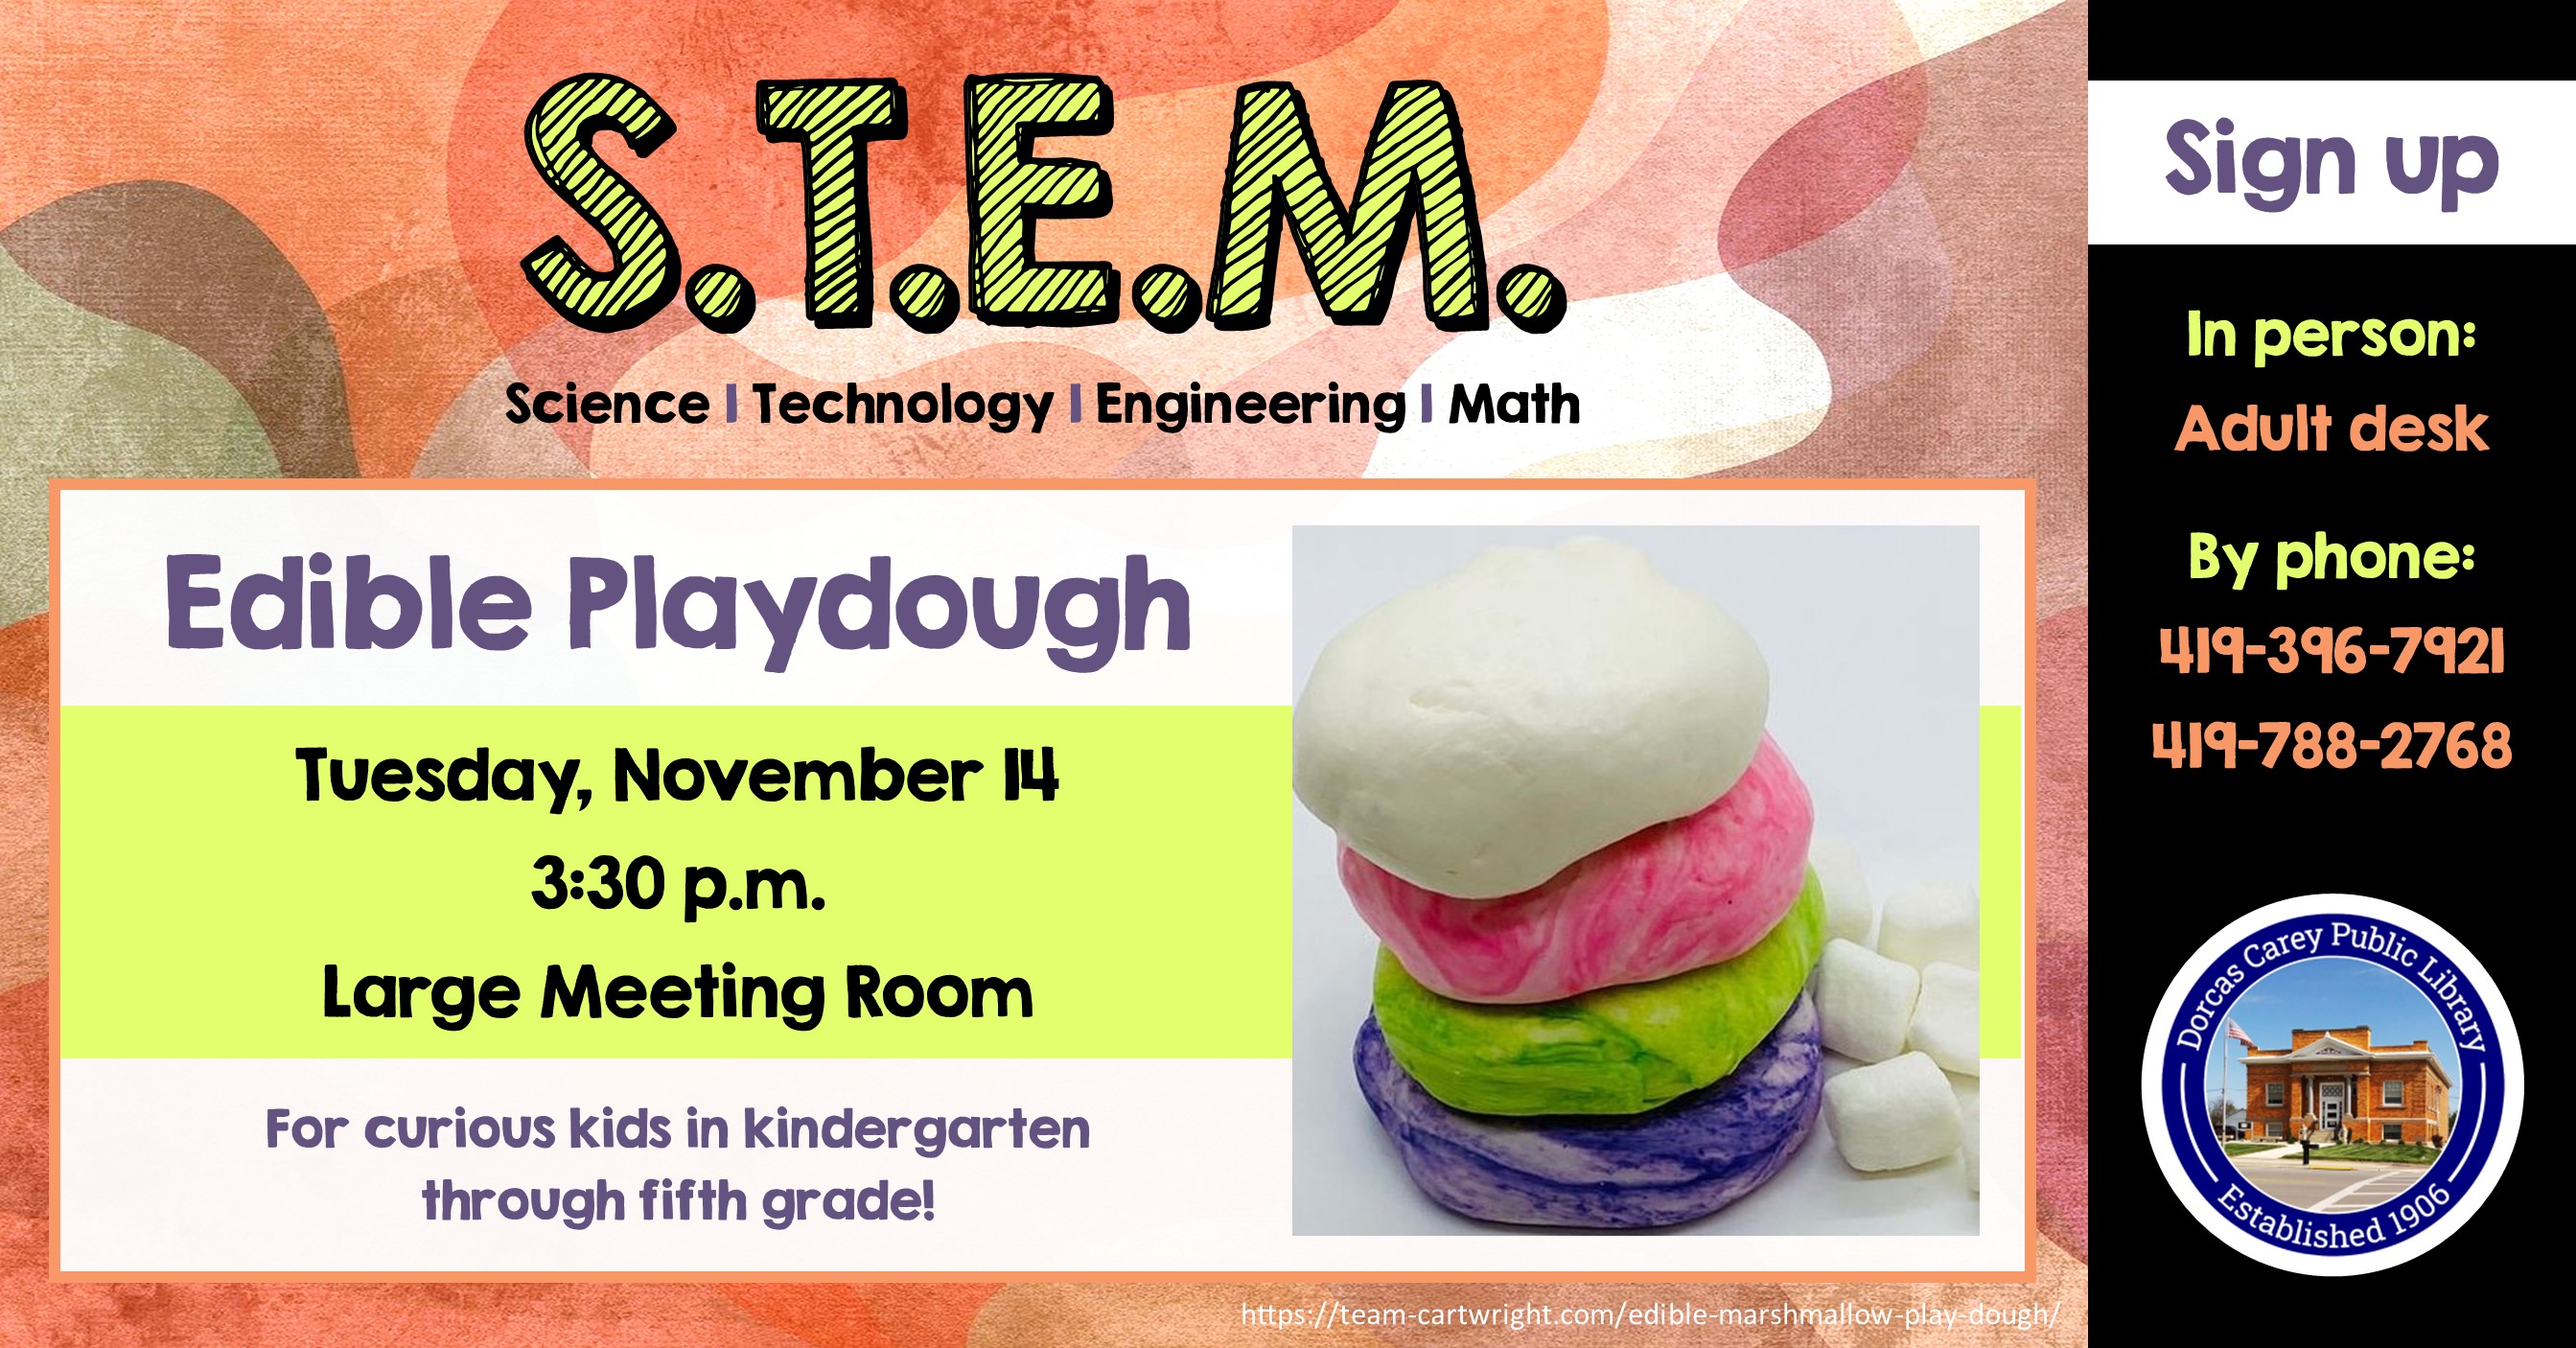 This program will be held on the second Tuesday of the month from September through May at 3:30 p.m.  Come enjoy the hands-on-experience of learning.  Children in grades Kindergarten through 5 are encouraged to join the learning fun!  This month’s project: Edible Playdough.  Please sign-up at the adult circulation desk or by phone at 419-396-7921 or 419-788-2768.